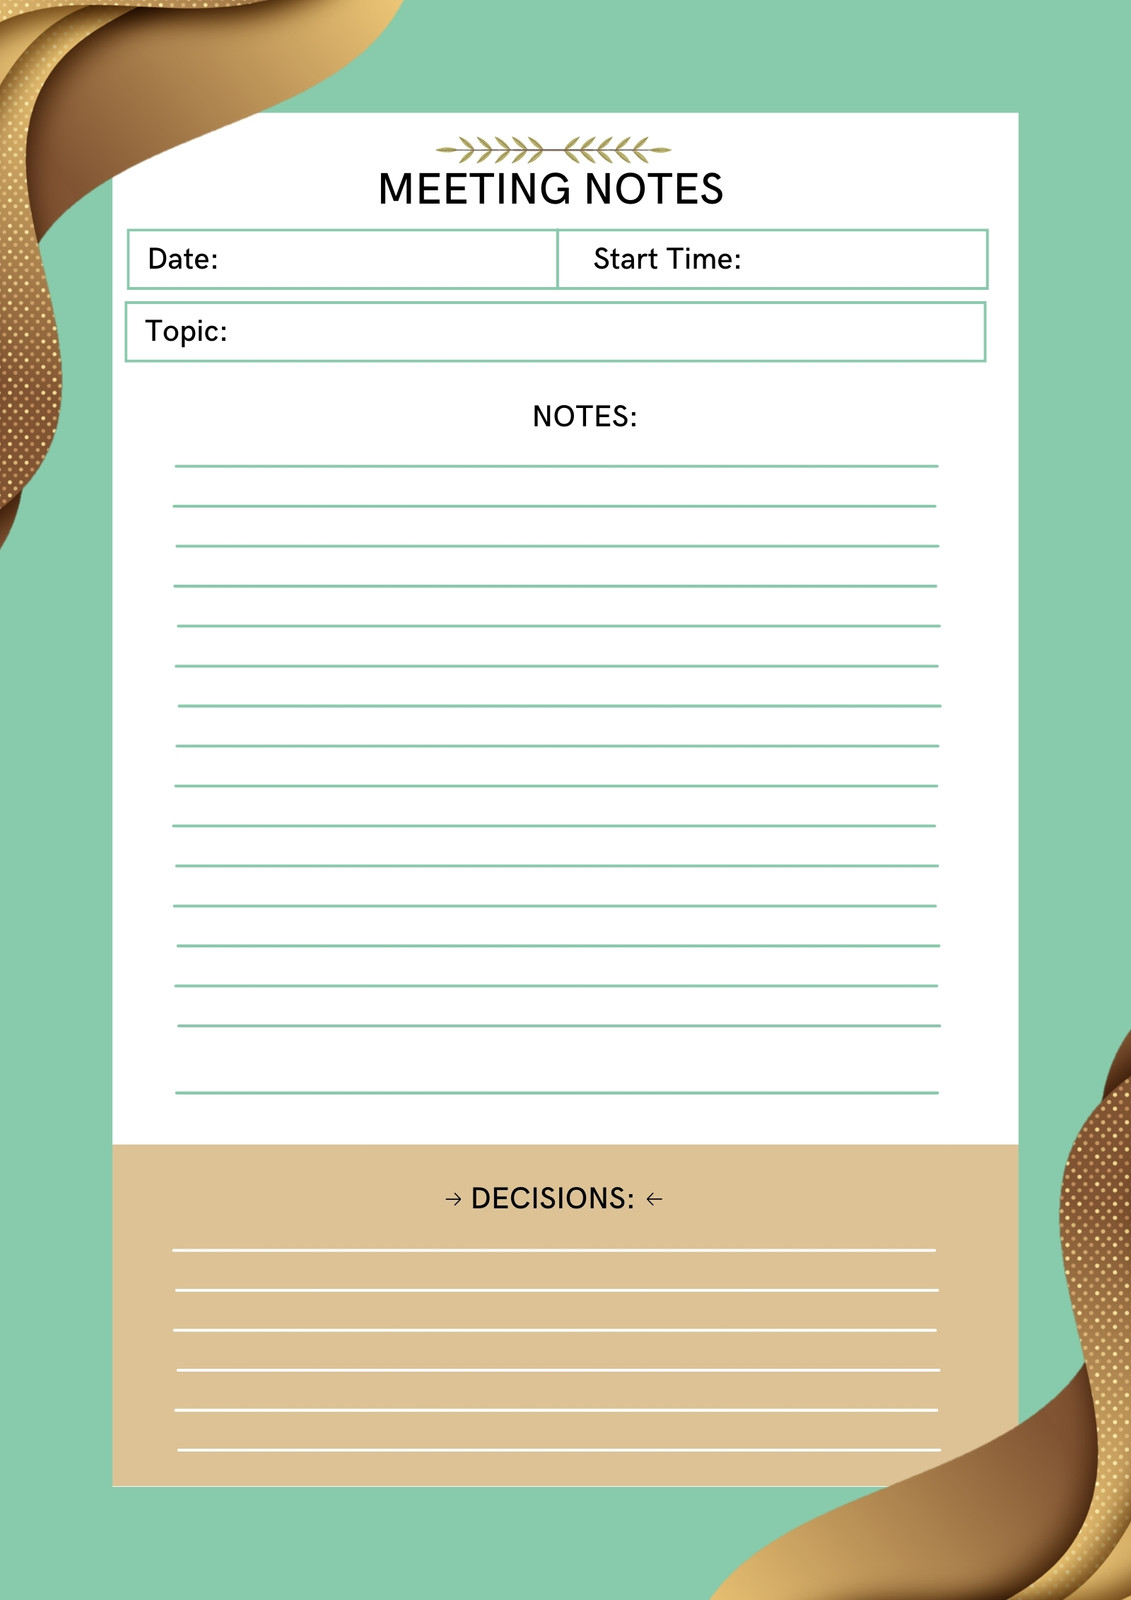 Plicht smal helpen Page 9 - Free customizable agenda document templates to print | Canva